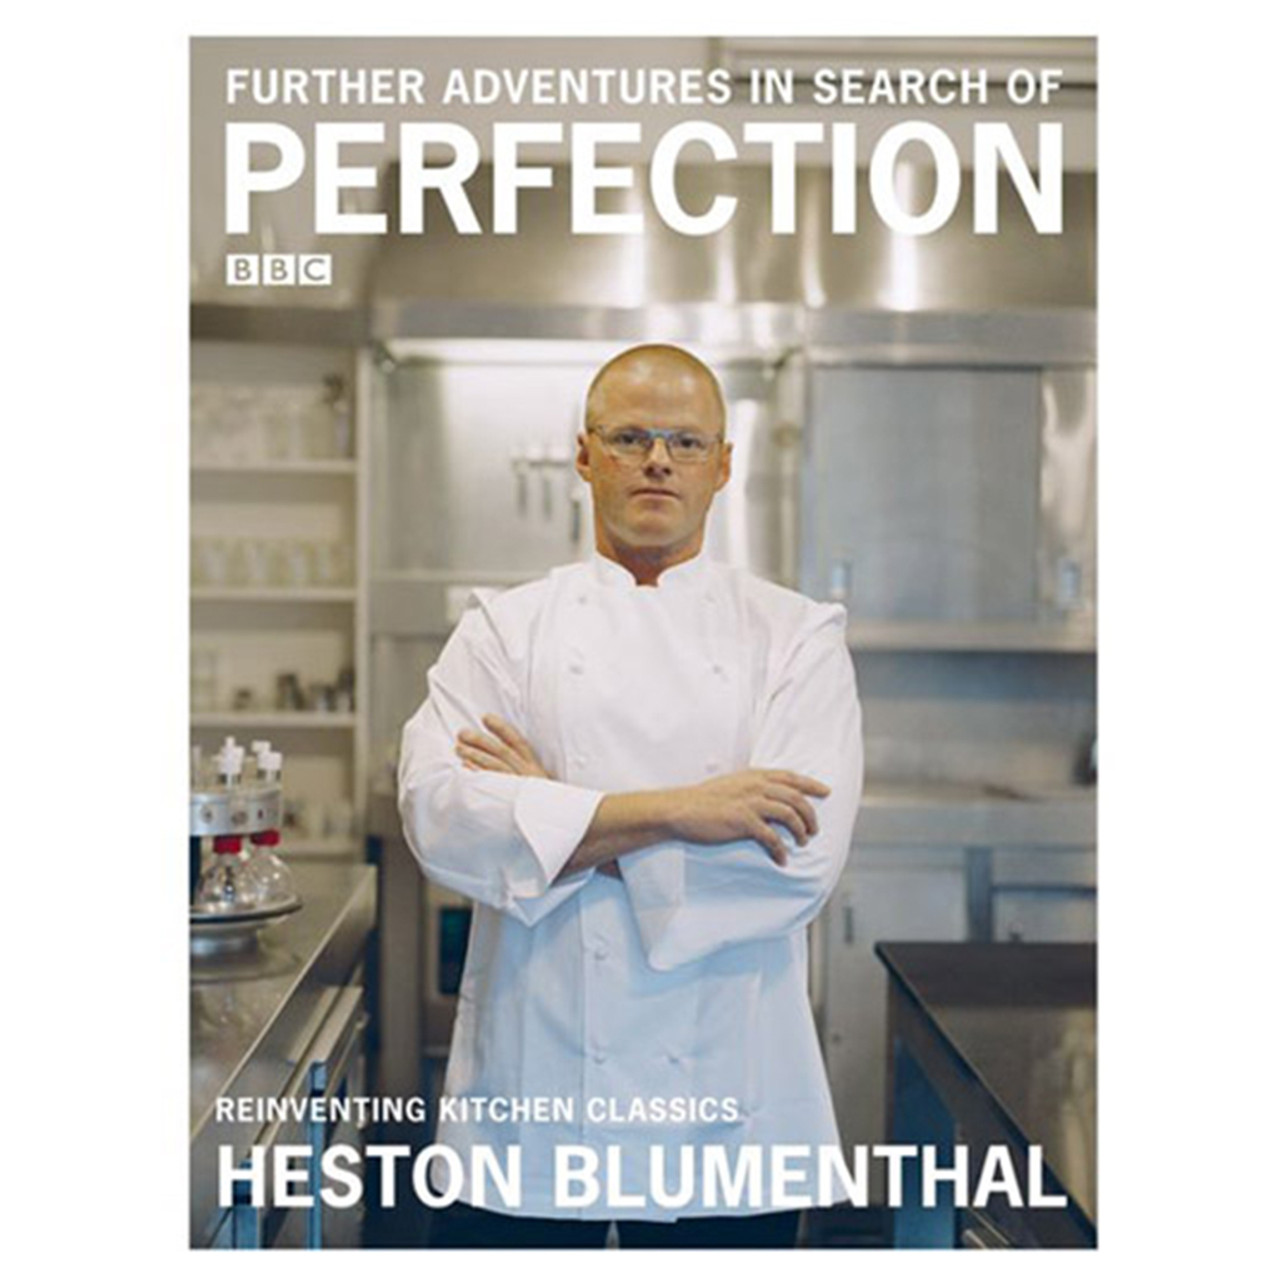 FURTHER ADVENTURES IN SEARCH OF PERFECTION BY HESTON BLUMENTHAL